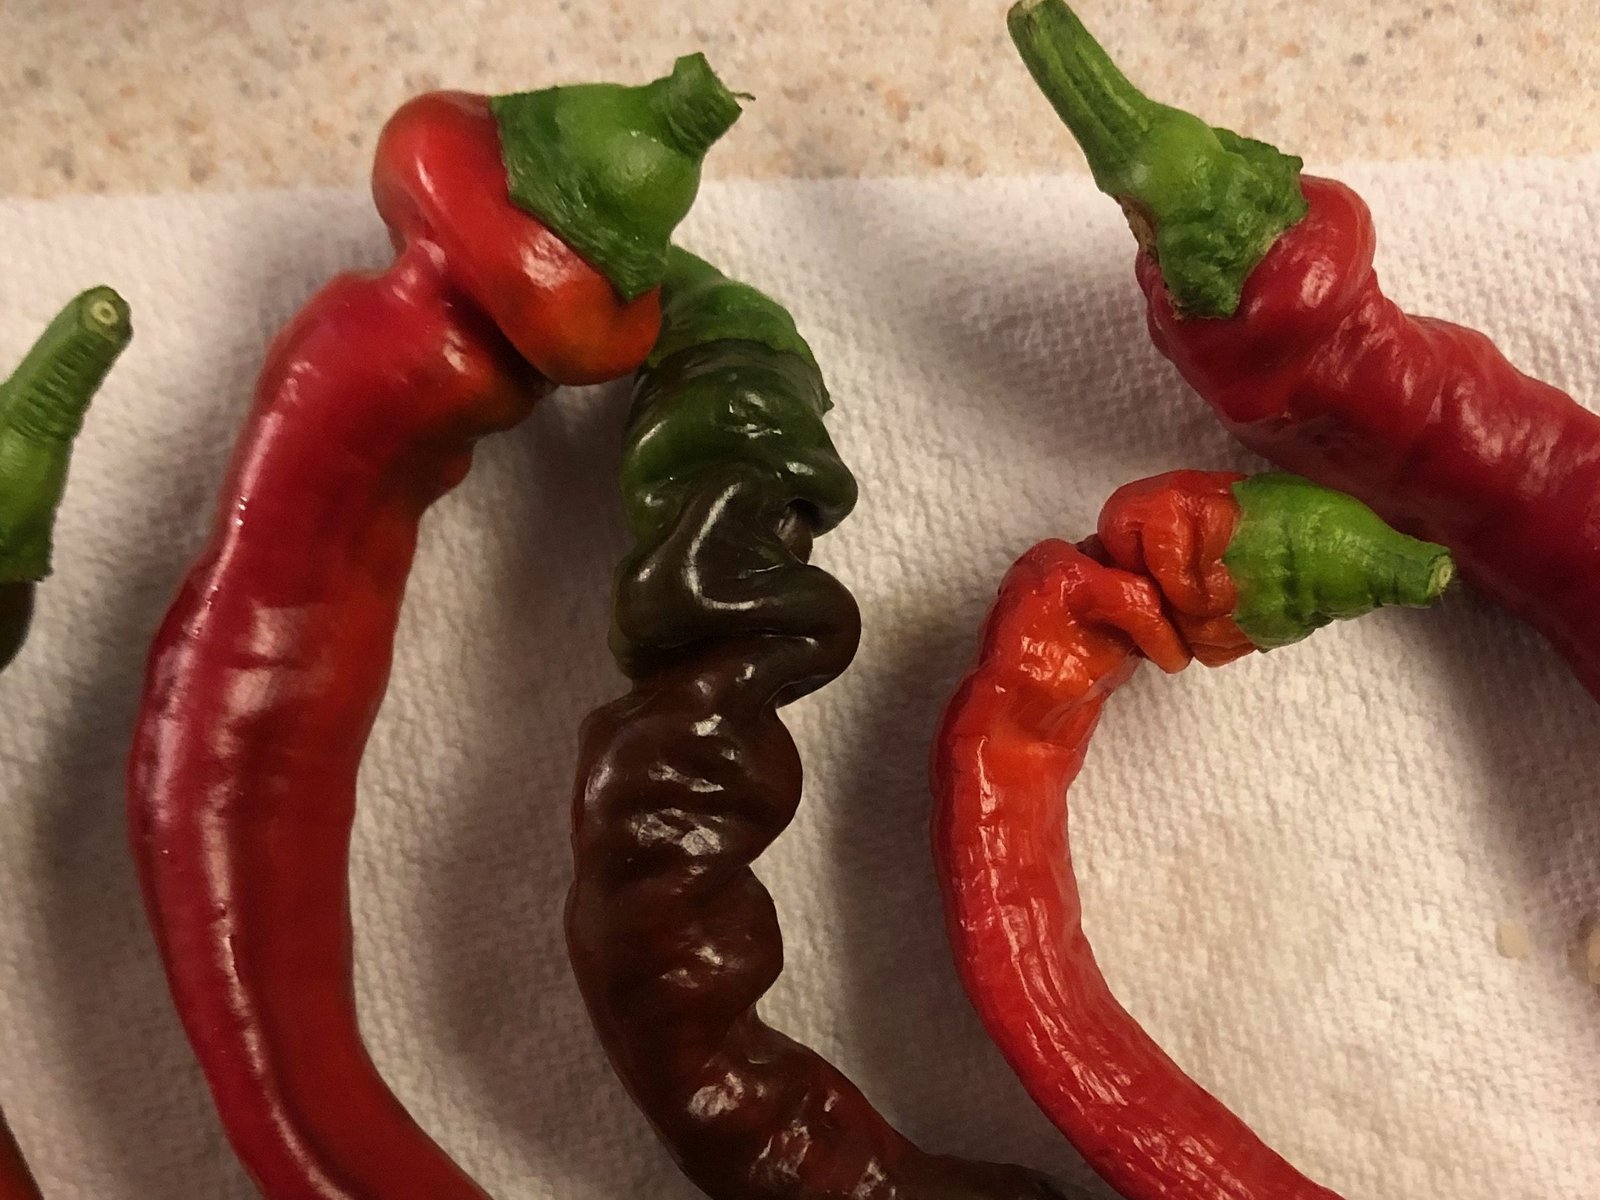 Ripe Jimmy Nardello Peppers
